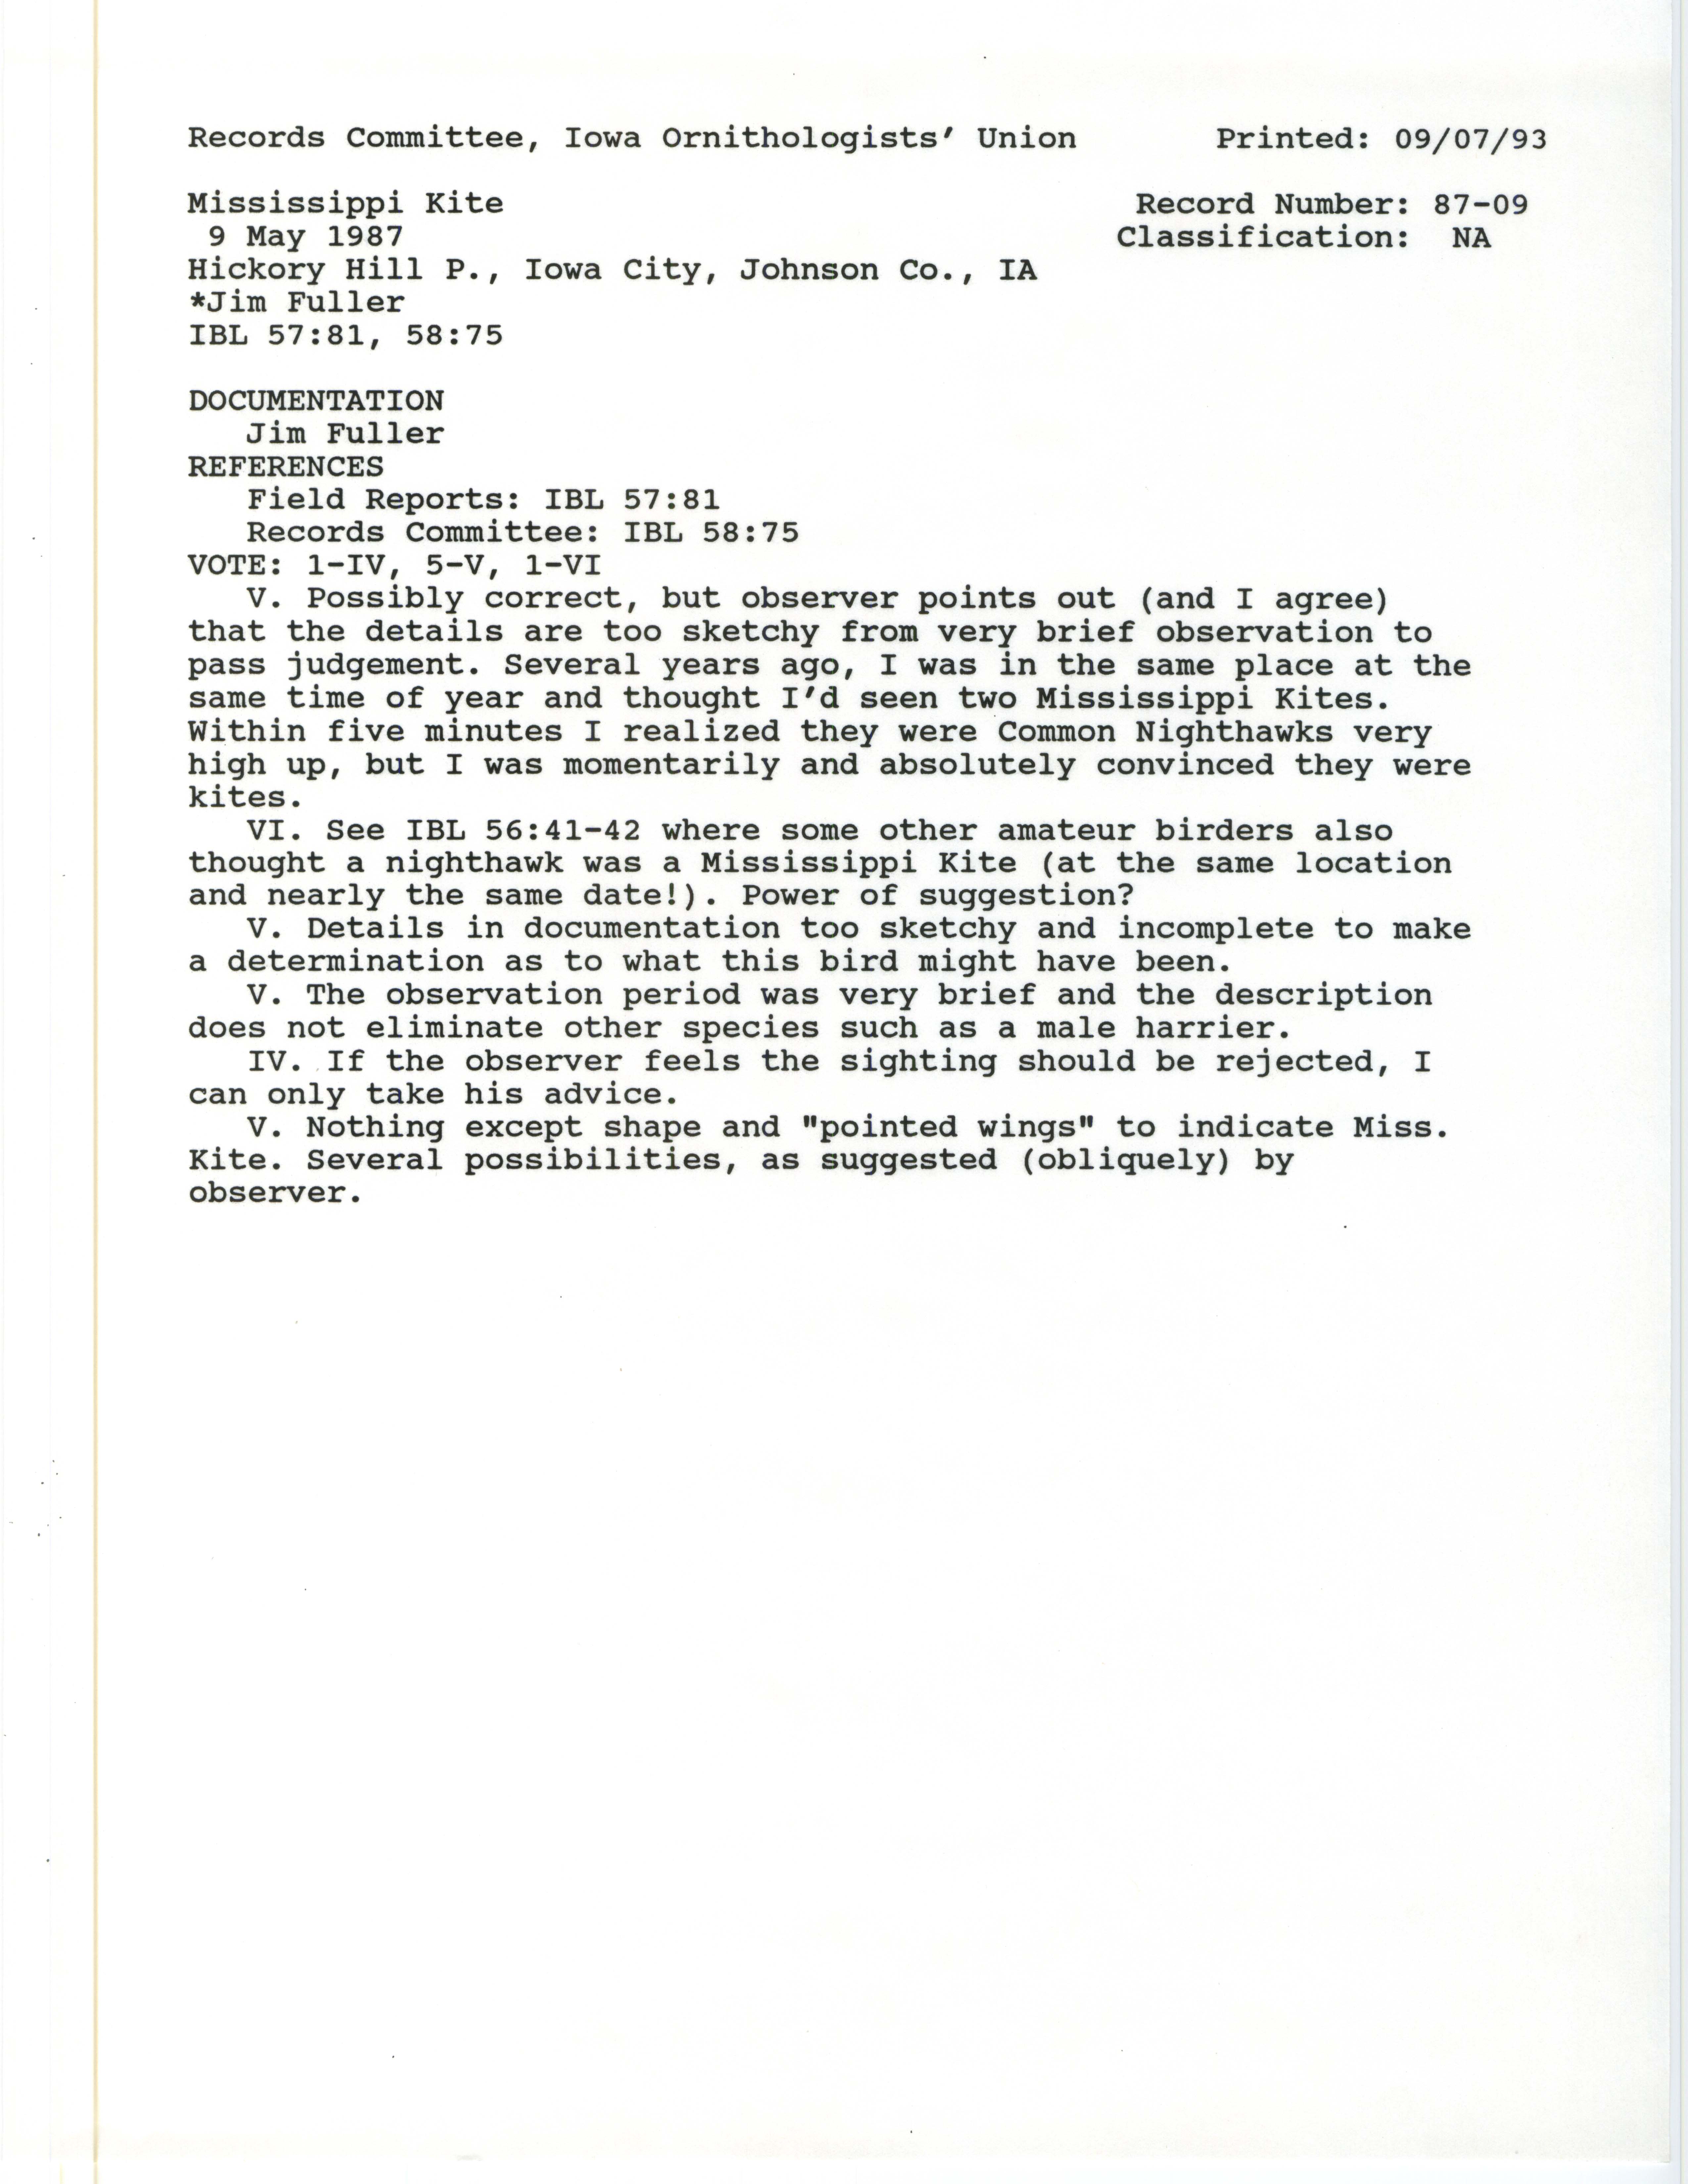 Records Committee review for rare bird sighting of Mississippi Kite at Hickory Hill Park, 1987